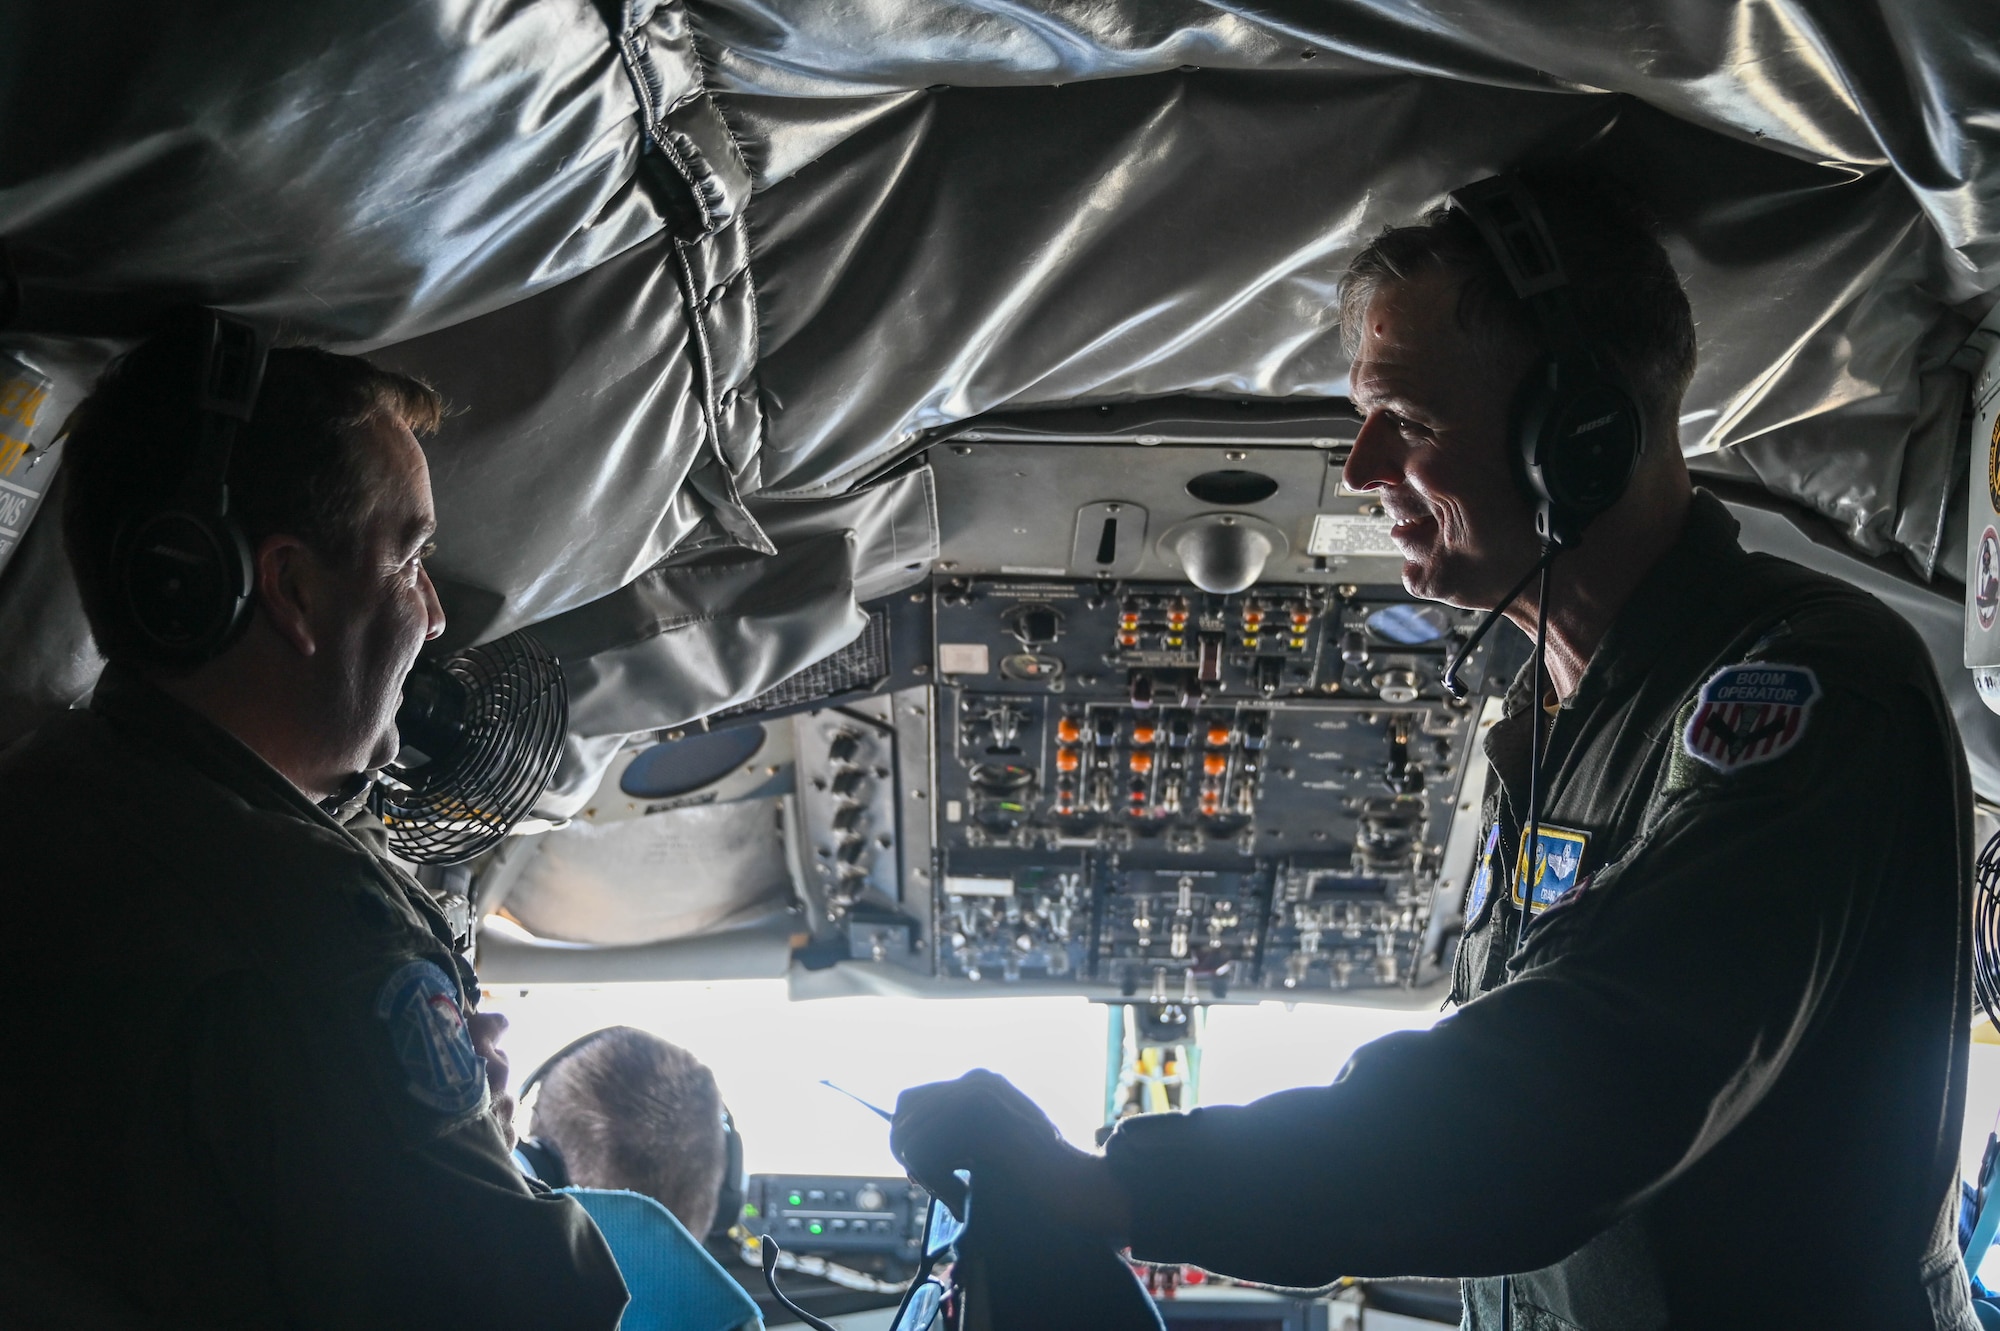 U.S. Air Force Lt. Col. John Hancock (left), 730th Air Mobility Training Squadron, talks with Maj. Gen. Craig D. Wills, 19th Air Force commander, on a KC-135 Stratotanker during a flight, June 23, 2022. Wills talked with student pilots and boom operators about current and future training changes. (U.S. Air Force photo by Senior Airman Kayla Christenson)